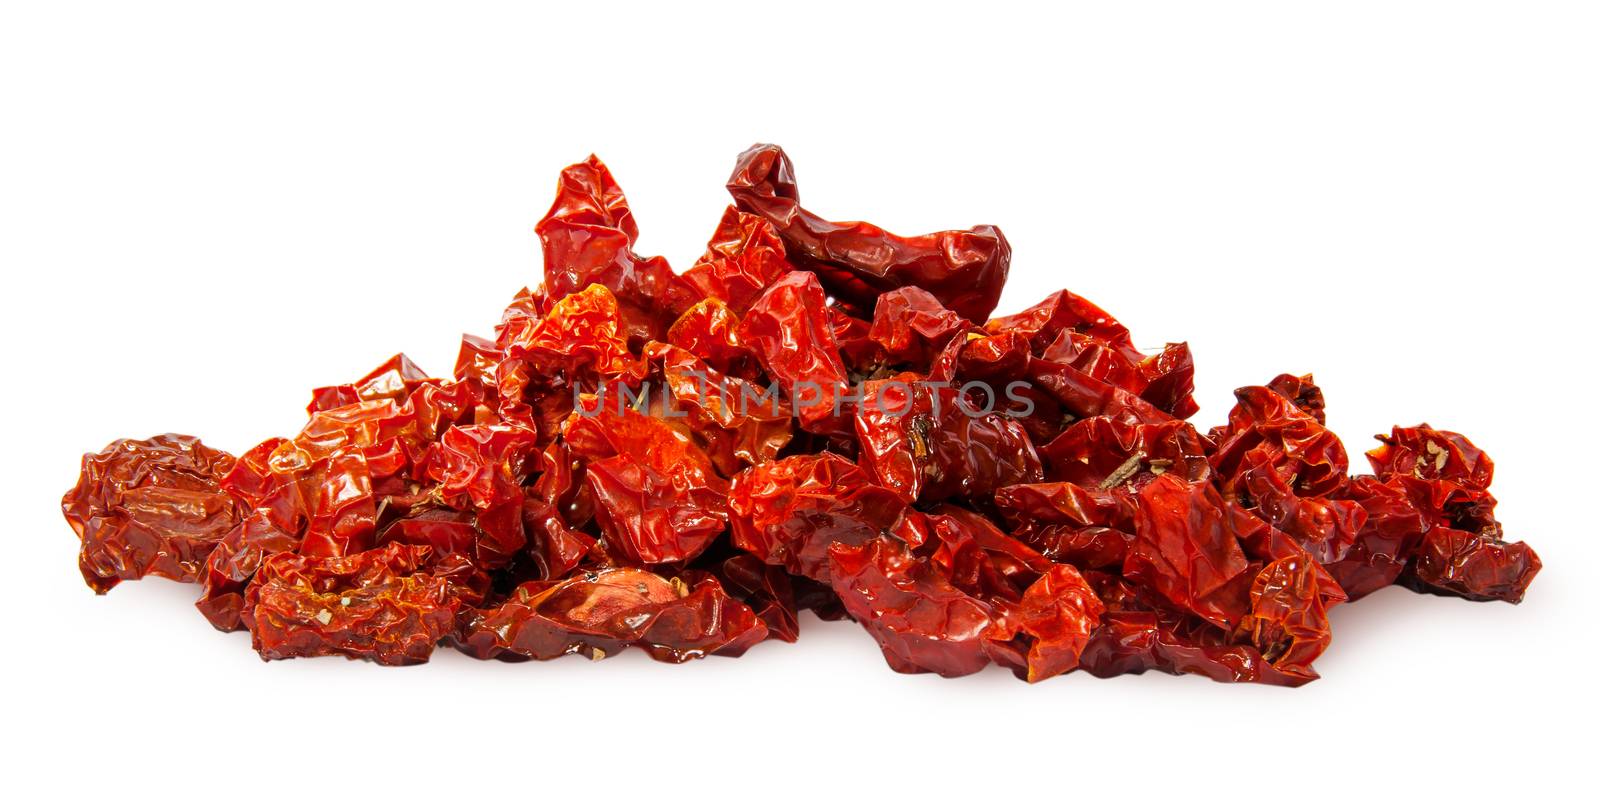 Pile of ripe red dried tomatoes by Cipariss